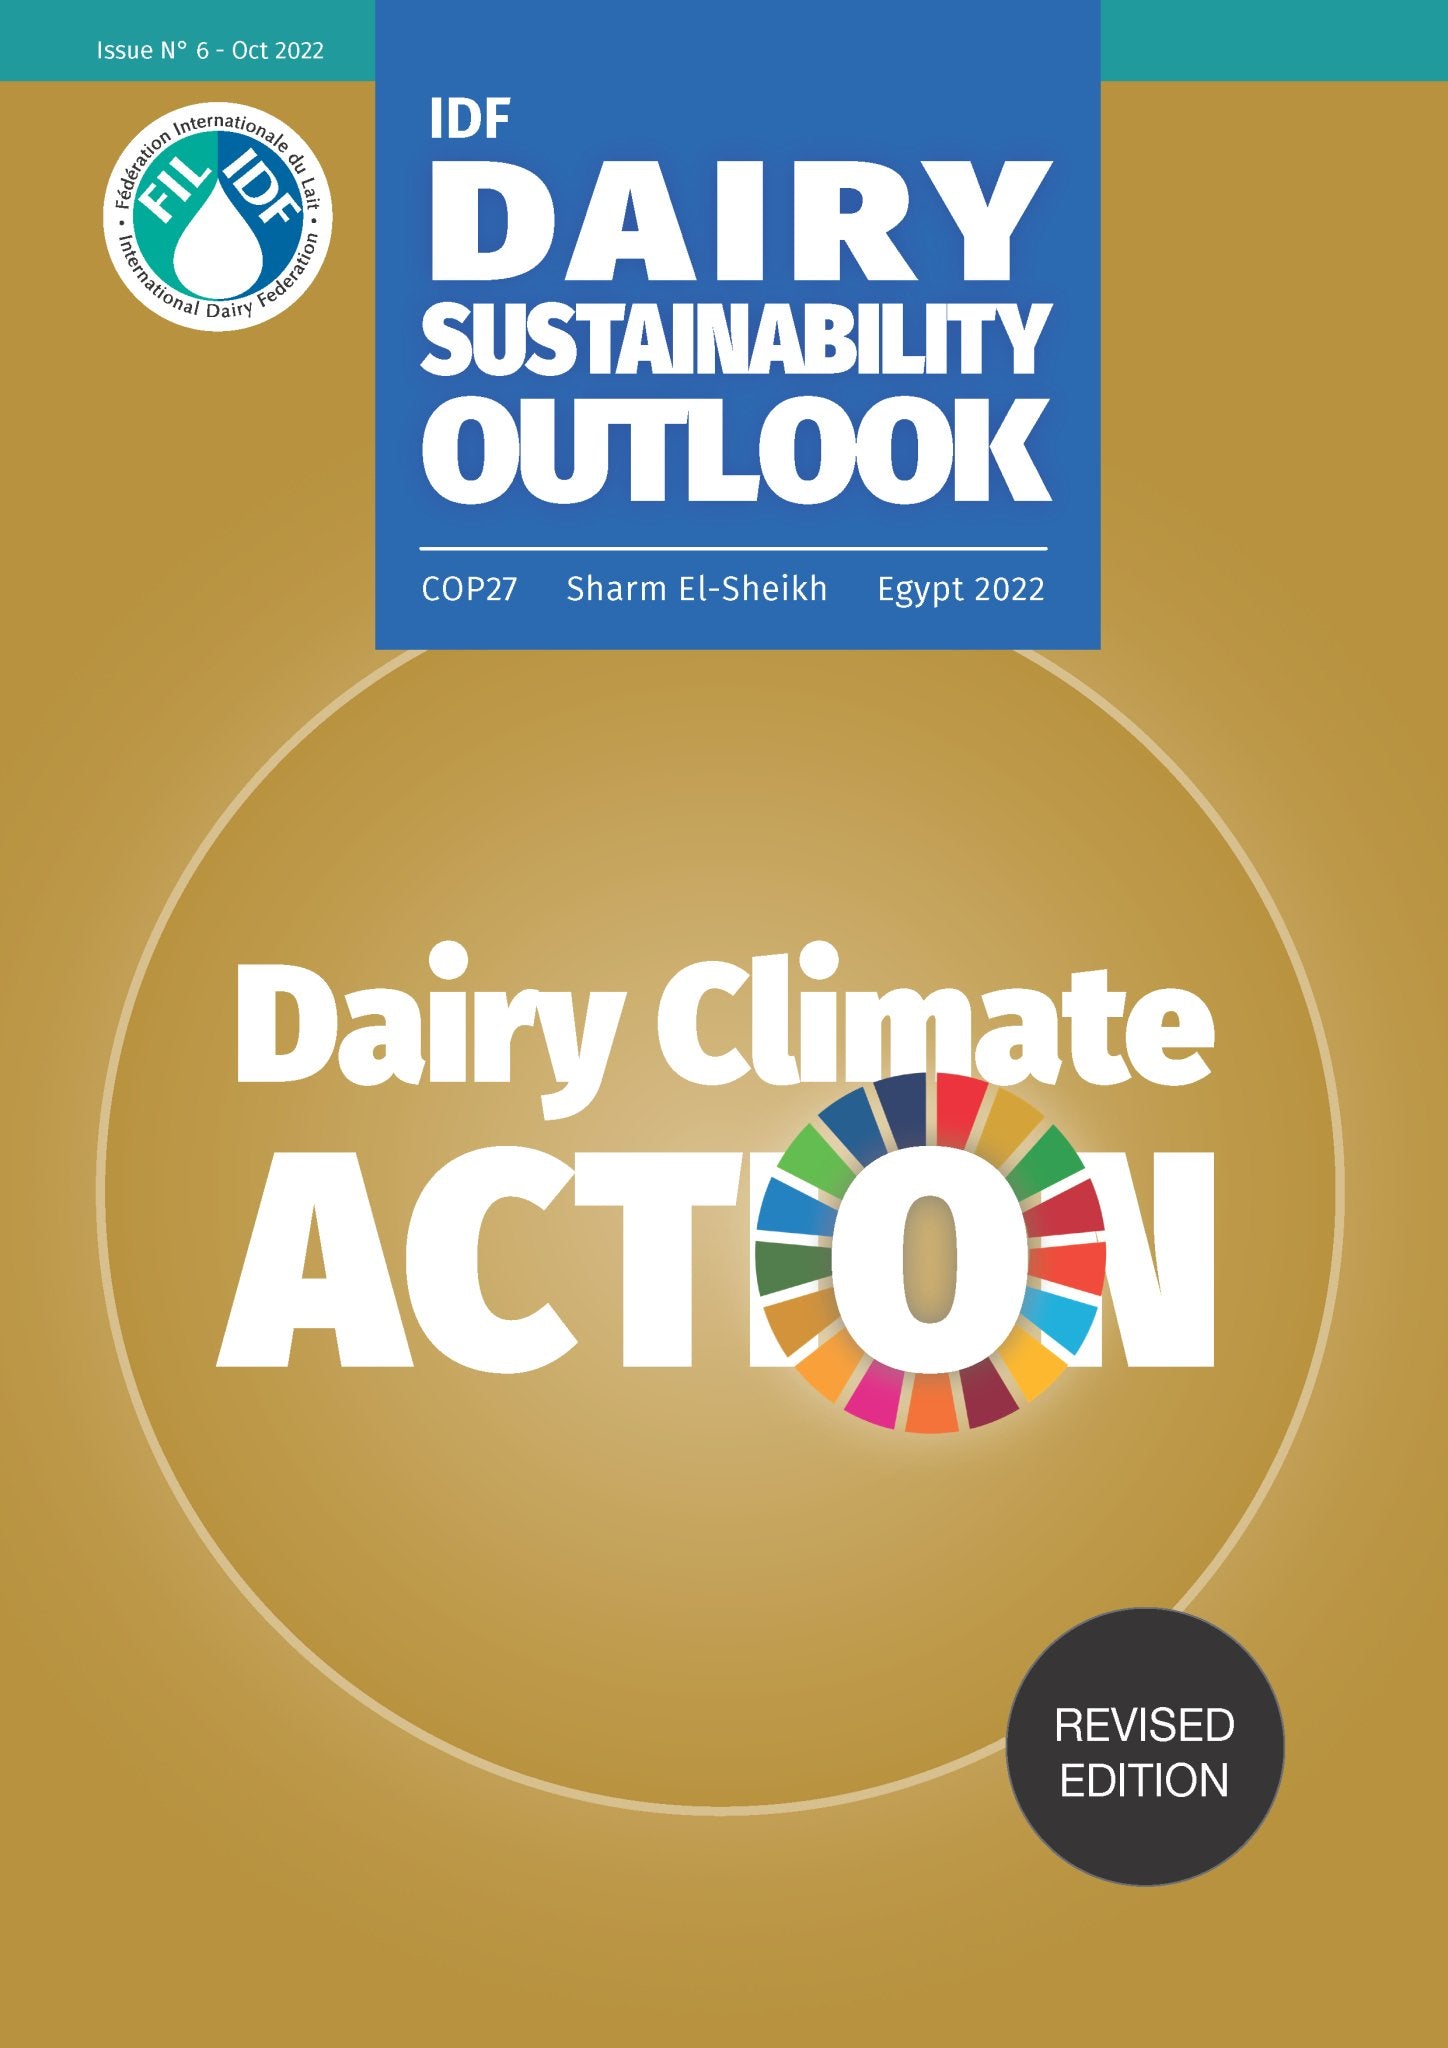 Issue 6: IDF Dairy Sustainability Outlook - COP27 - FIL-IDF